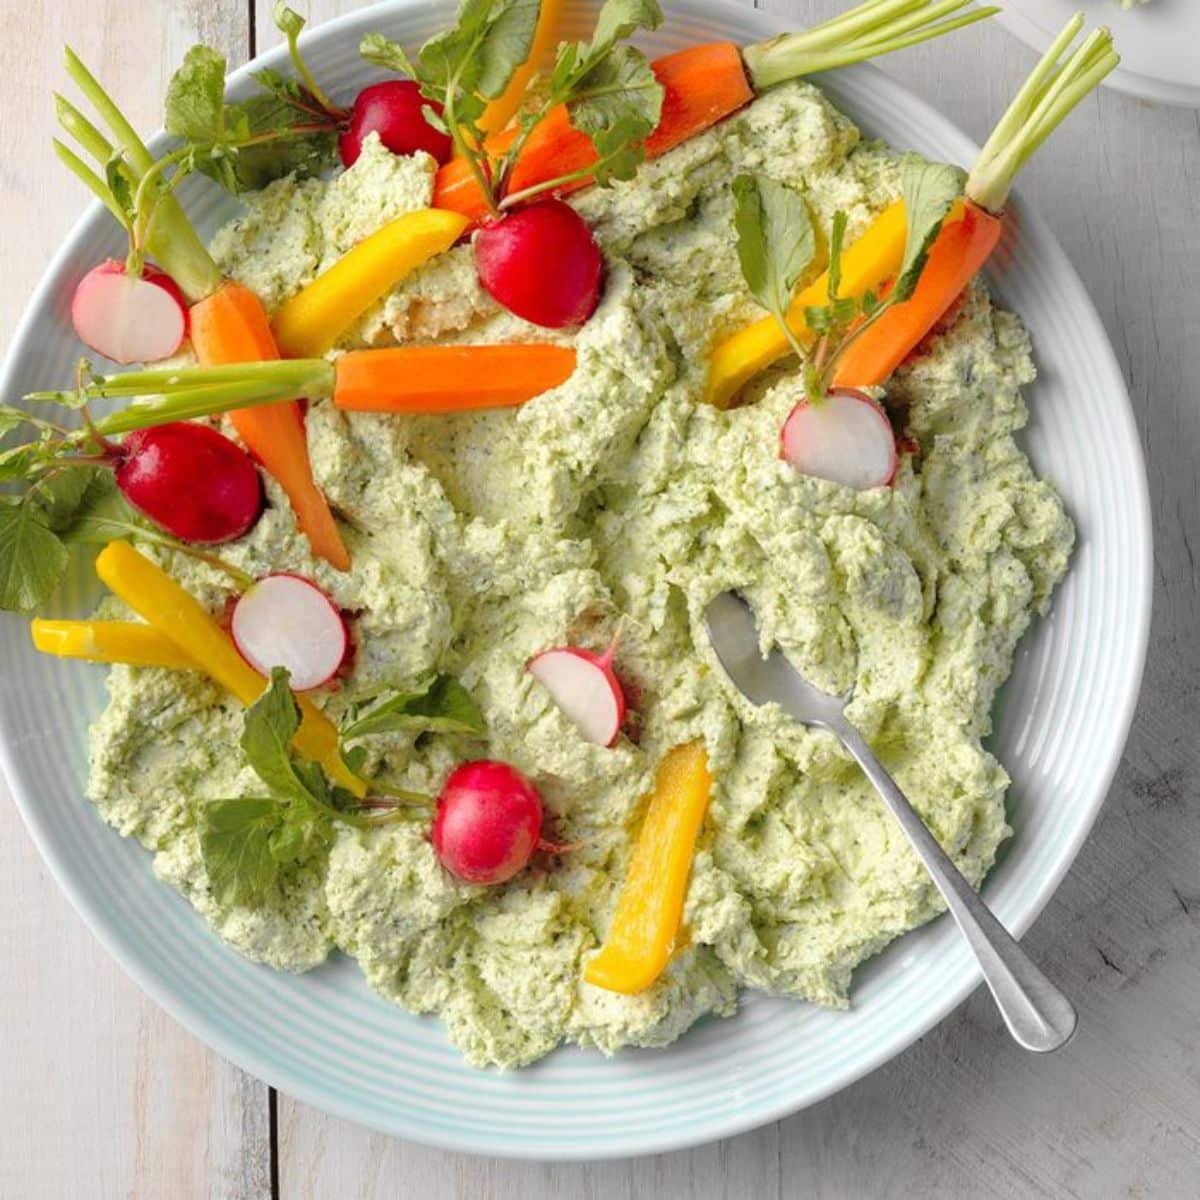 Herbed Feta Dip on a blue plate with a spoon and sliced veggies.